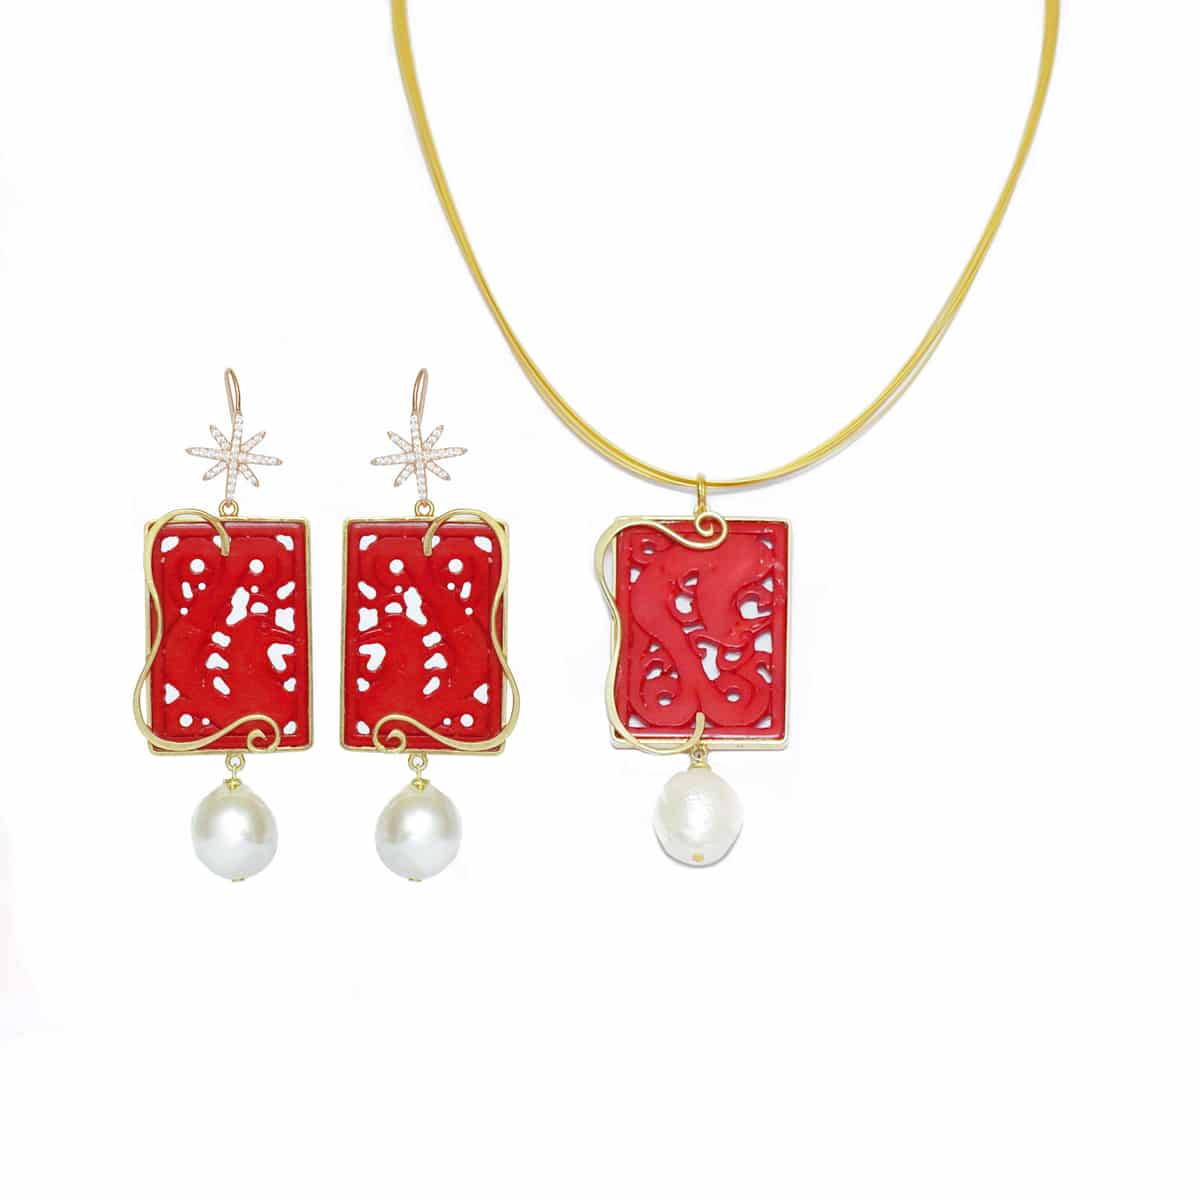 HONG BOCK design set / necklace and earrings